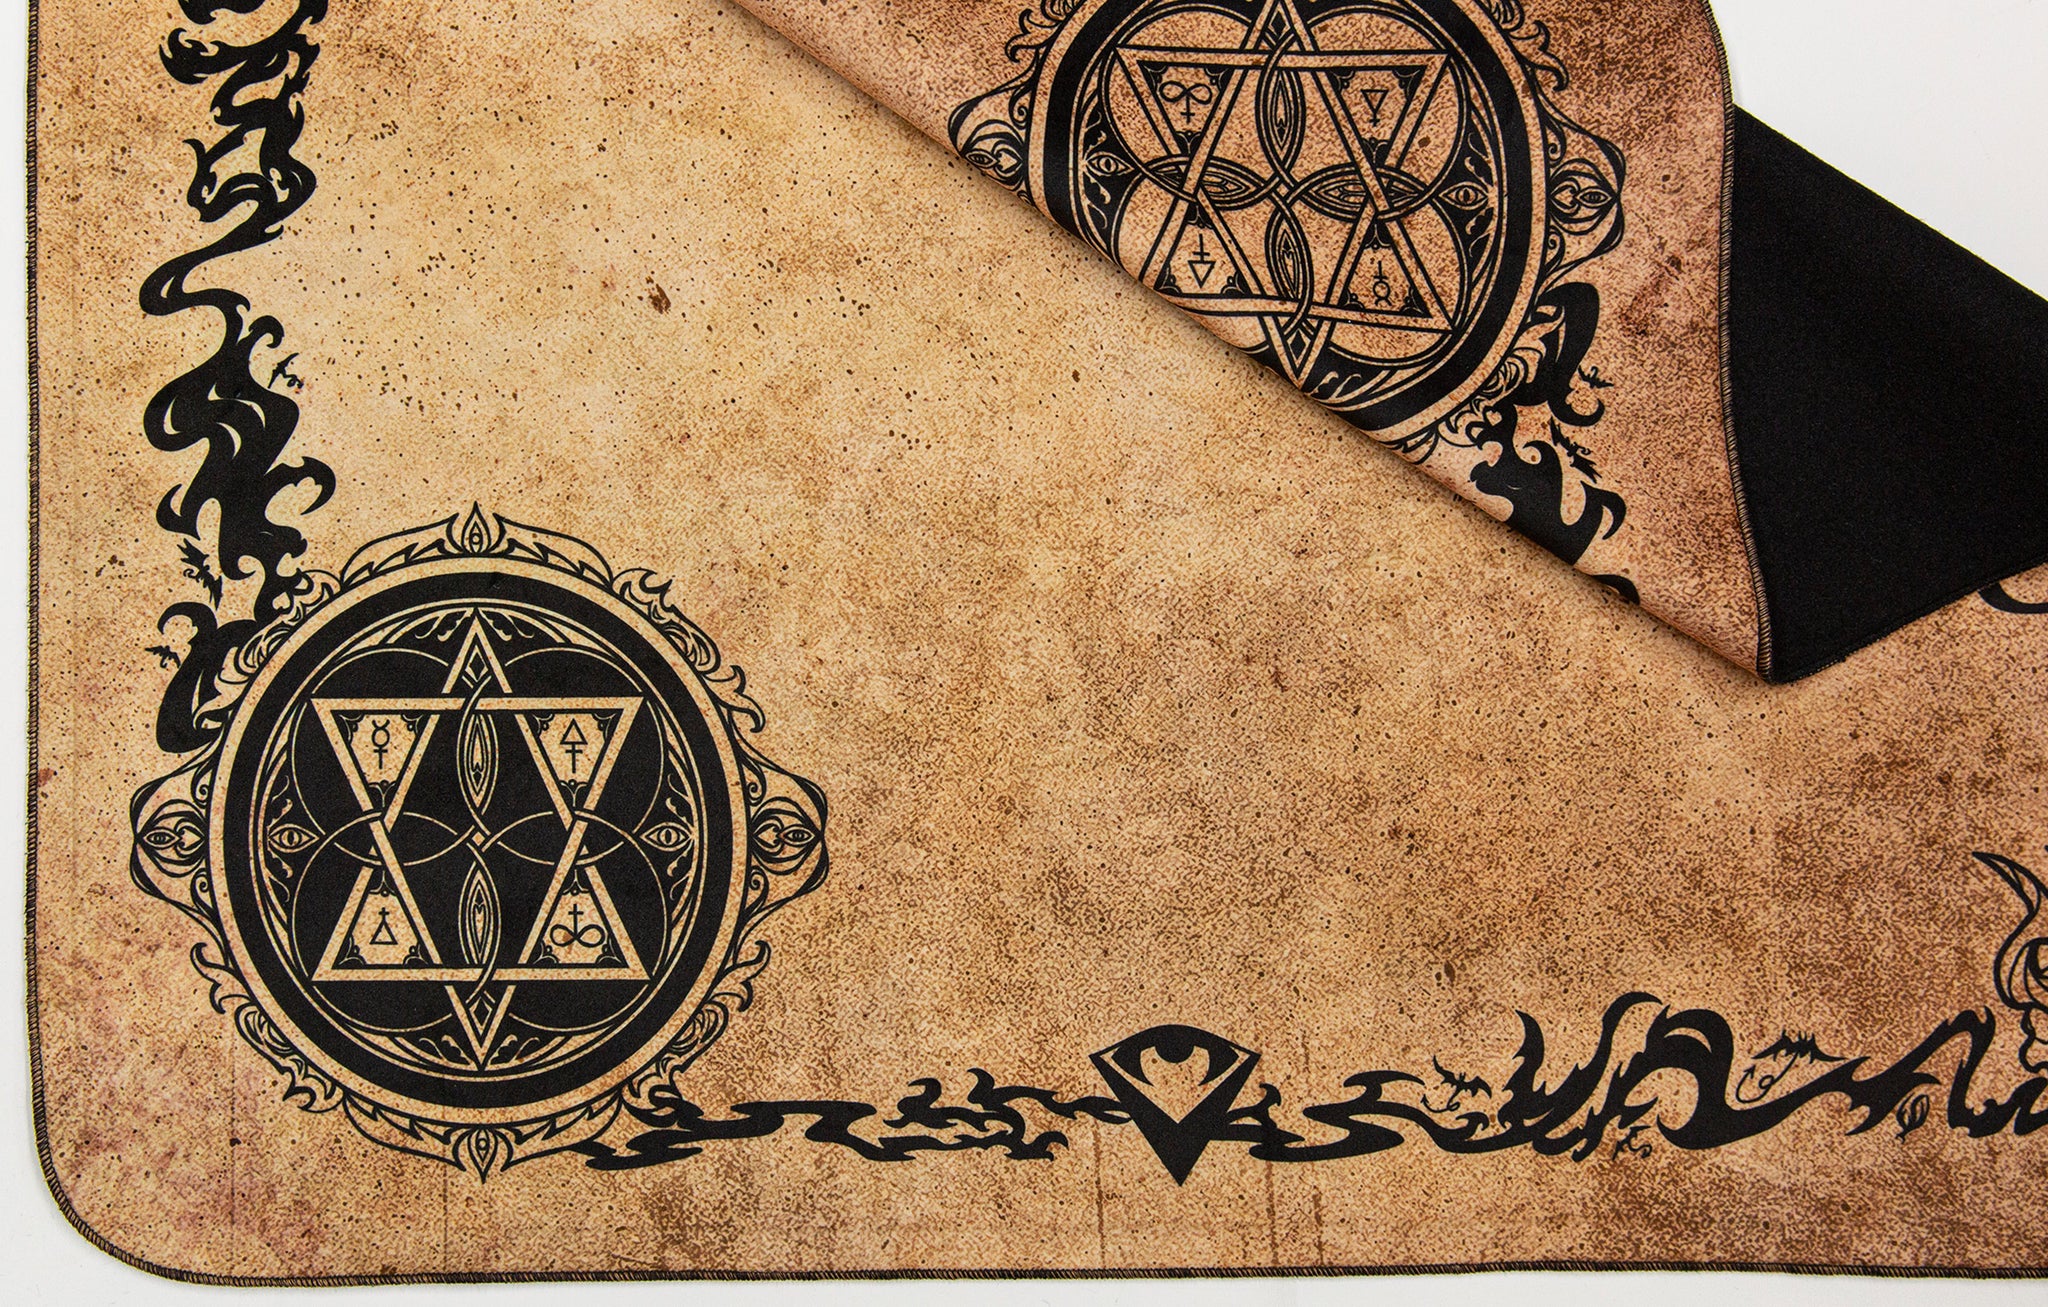 Altar of the Cursed x "The Scroll of Summoning" | PvraPrint on DLES